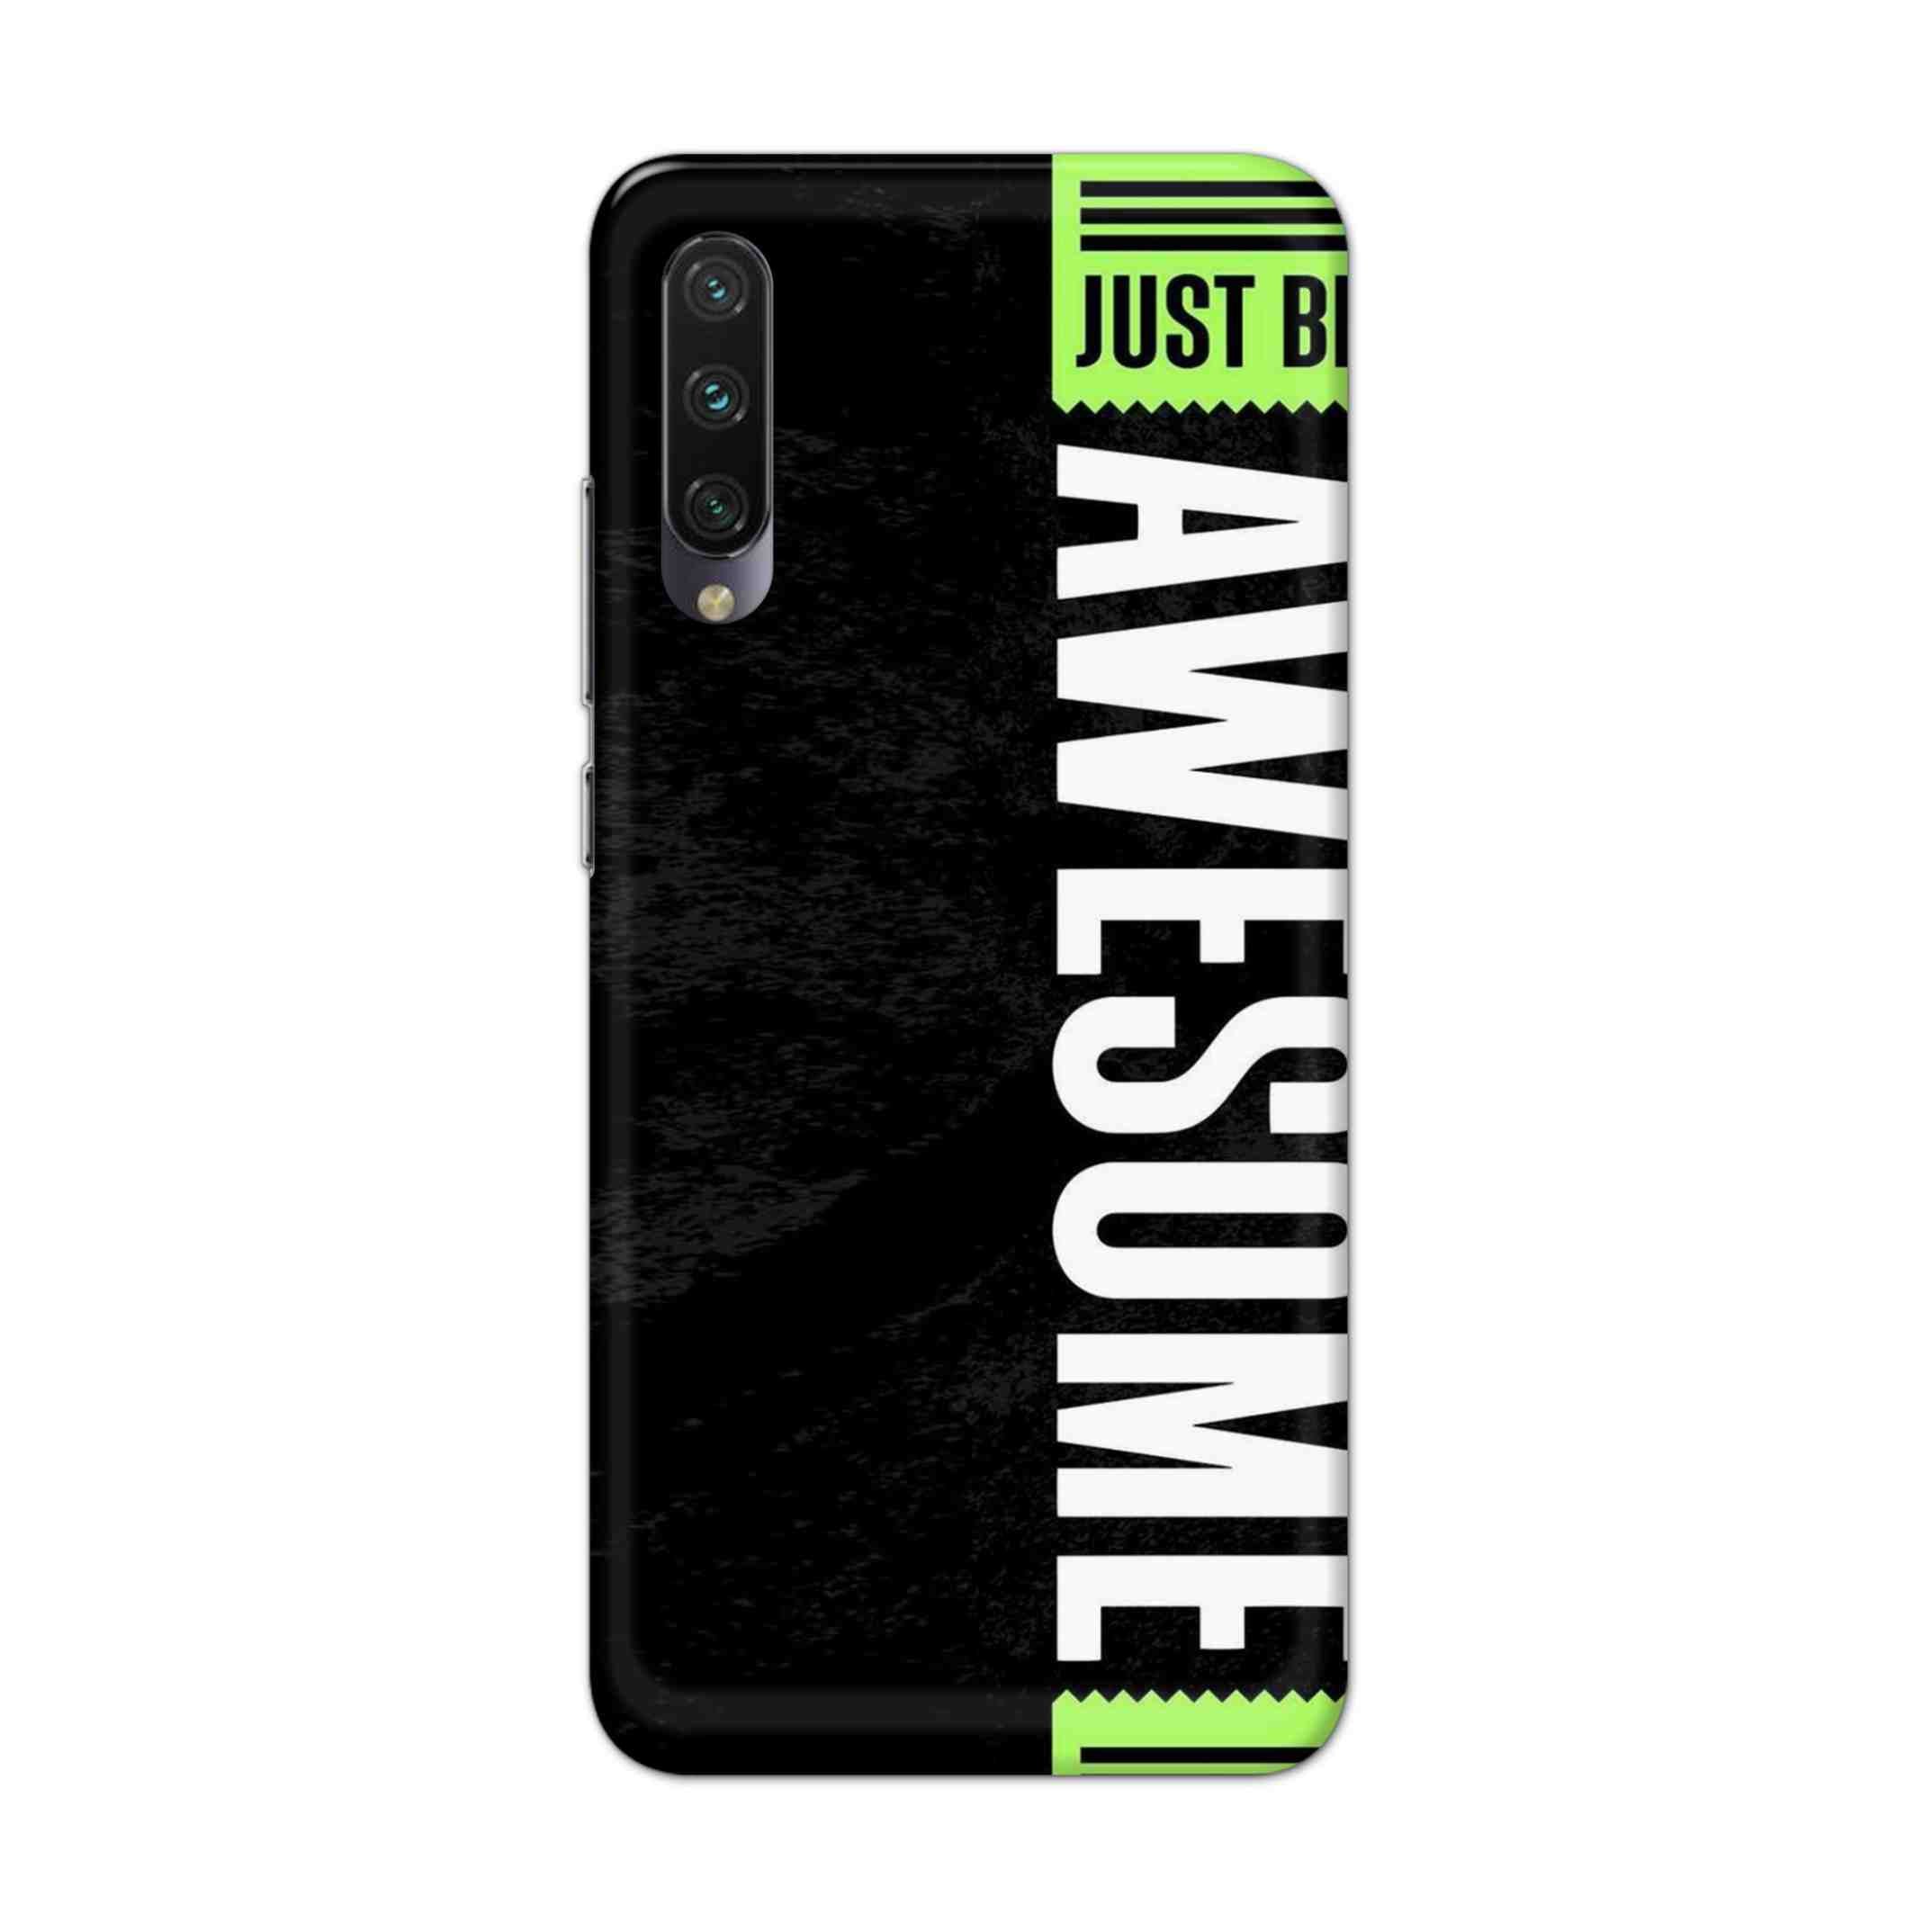 Buy Awesome Street Hard Back Mobile Phone Case Cover For Xiaomi Mi A3 Online